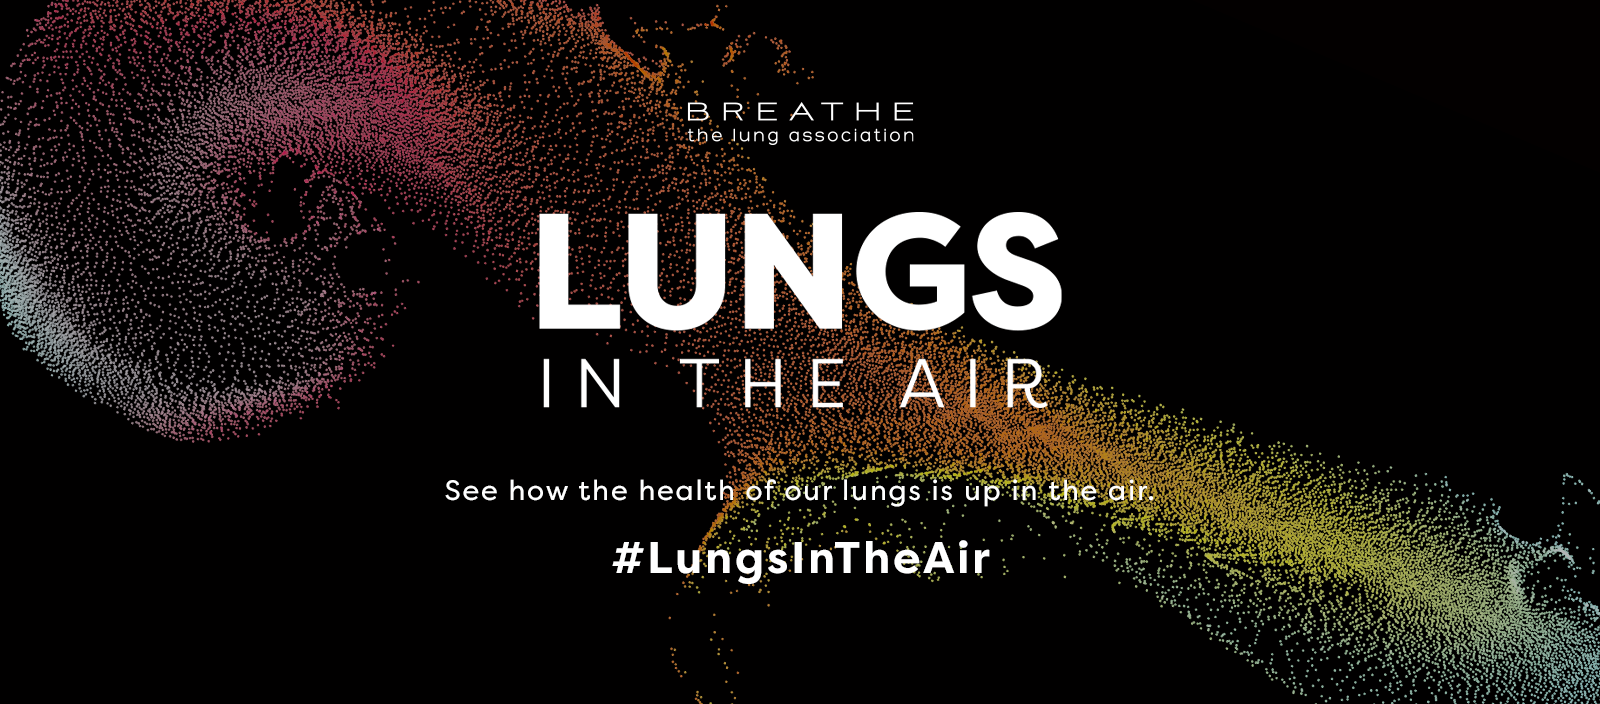 Lungs in the air